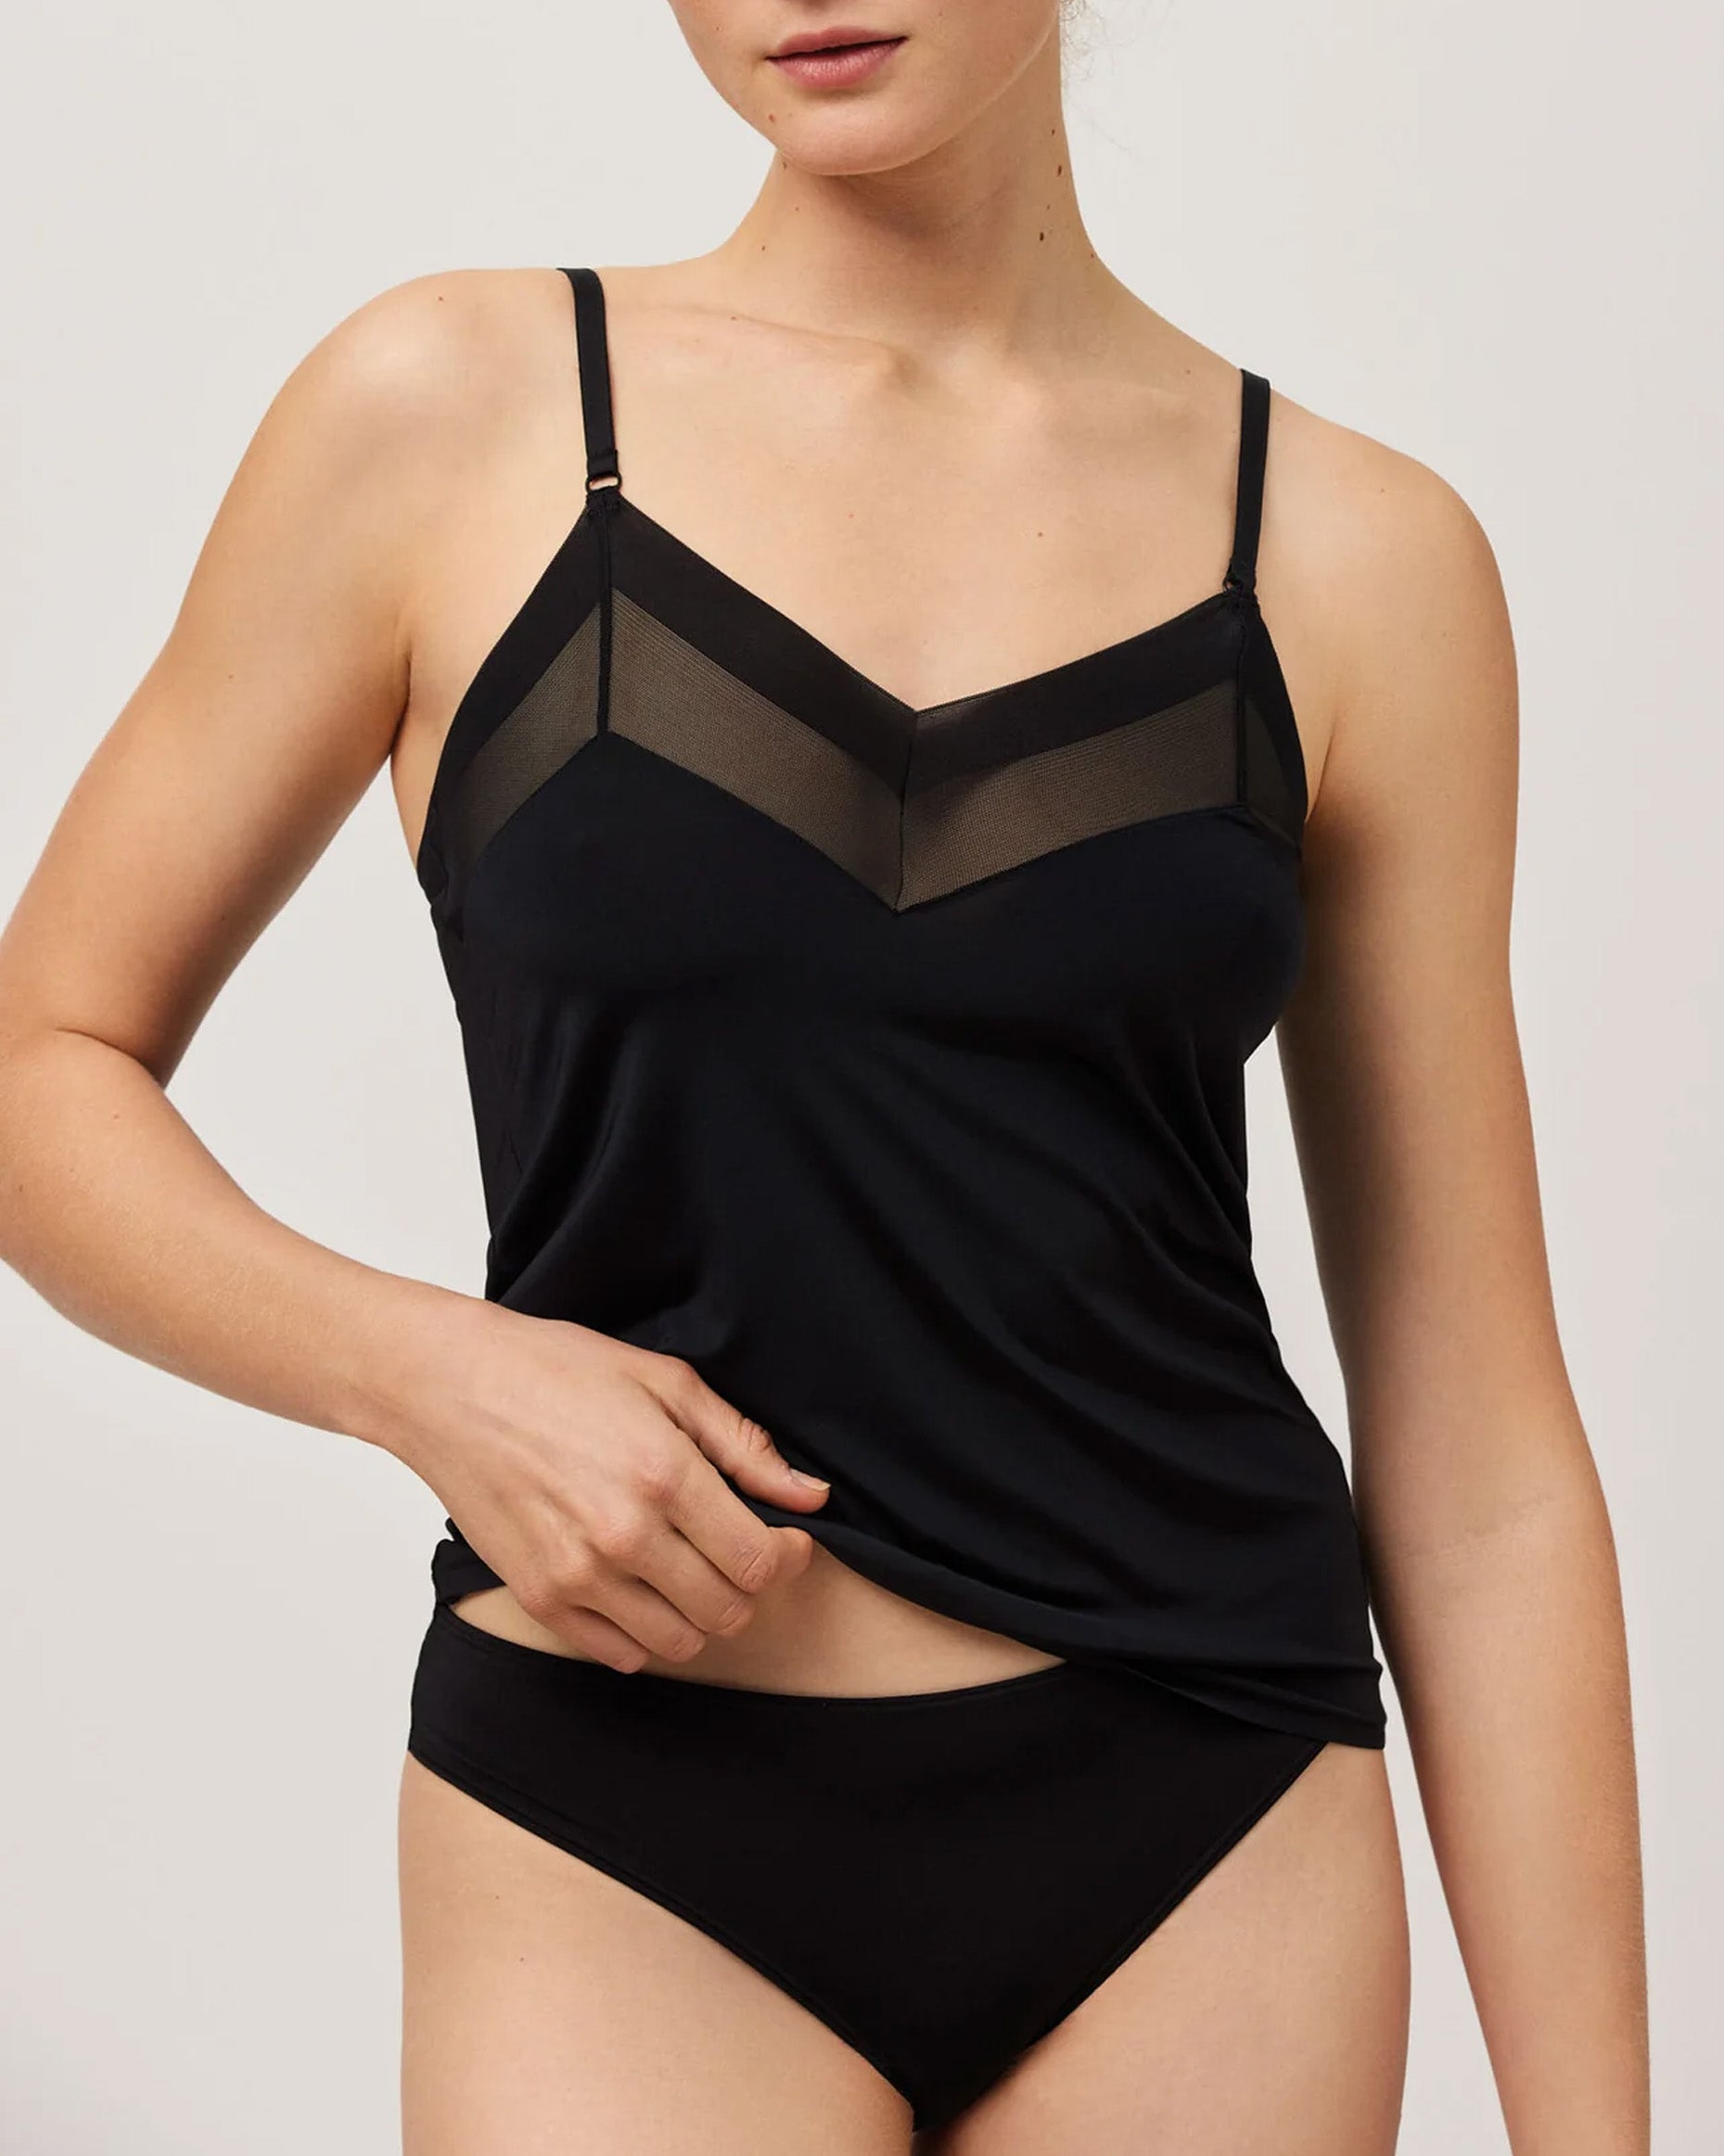 Ysabel Mora 10053 Sheer Panel String Top - Slinky and stretchy black string top with thin adjustable and removable strap top with a transparent mesh v neck panel, perfect for low cut tops and dresses.